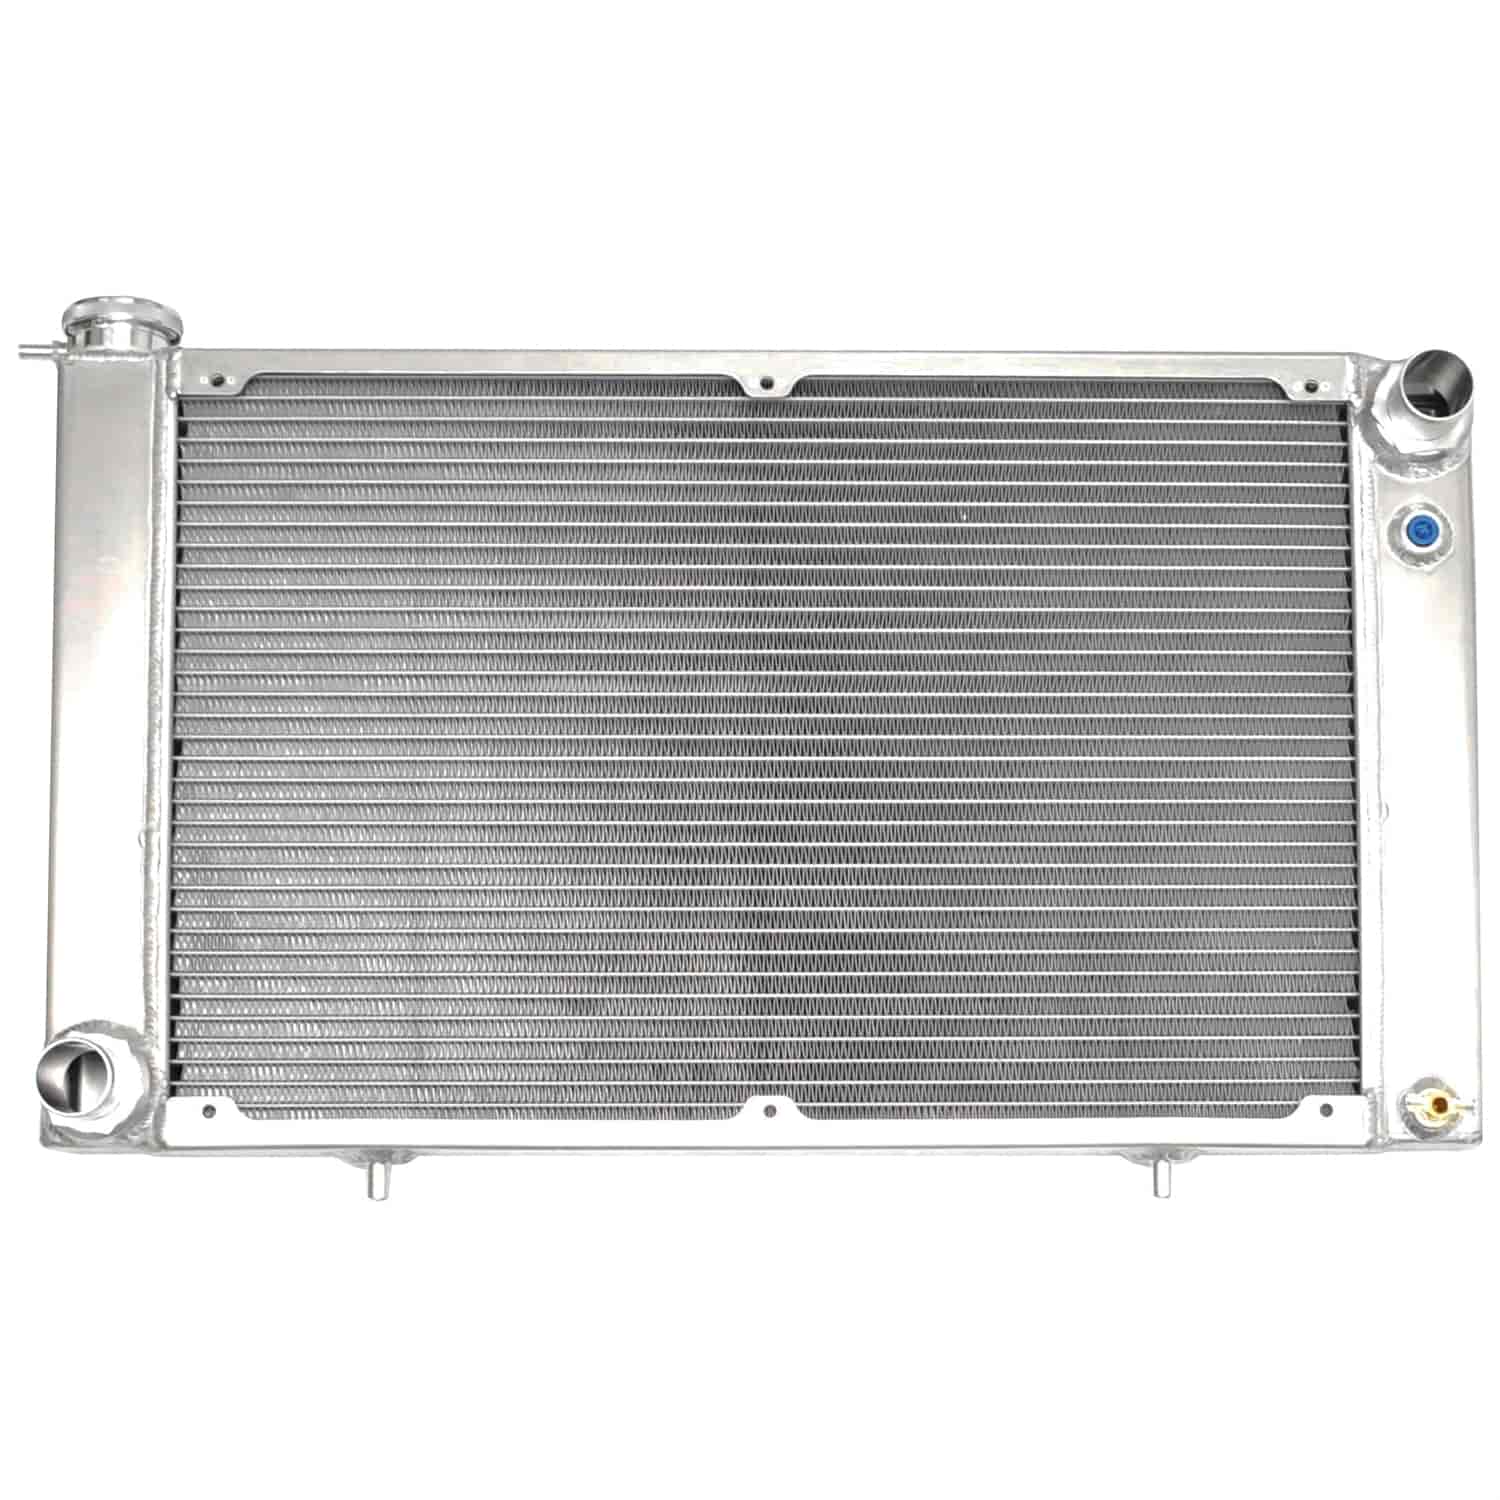 High-Efficiency Core OE Fit Aluminum Radiator 1967-1970 Ford Mustang 5.0L Coyote